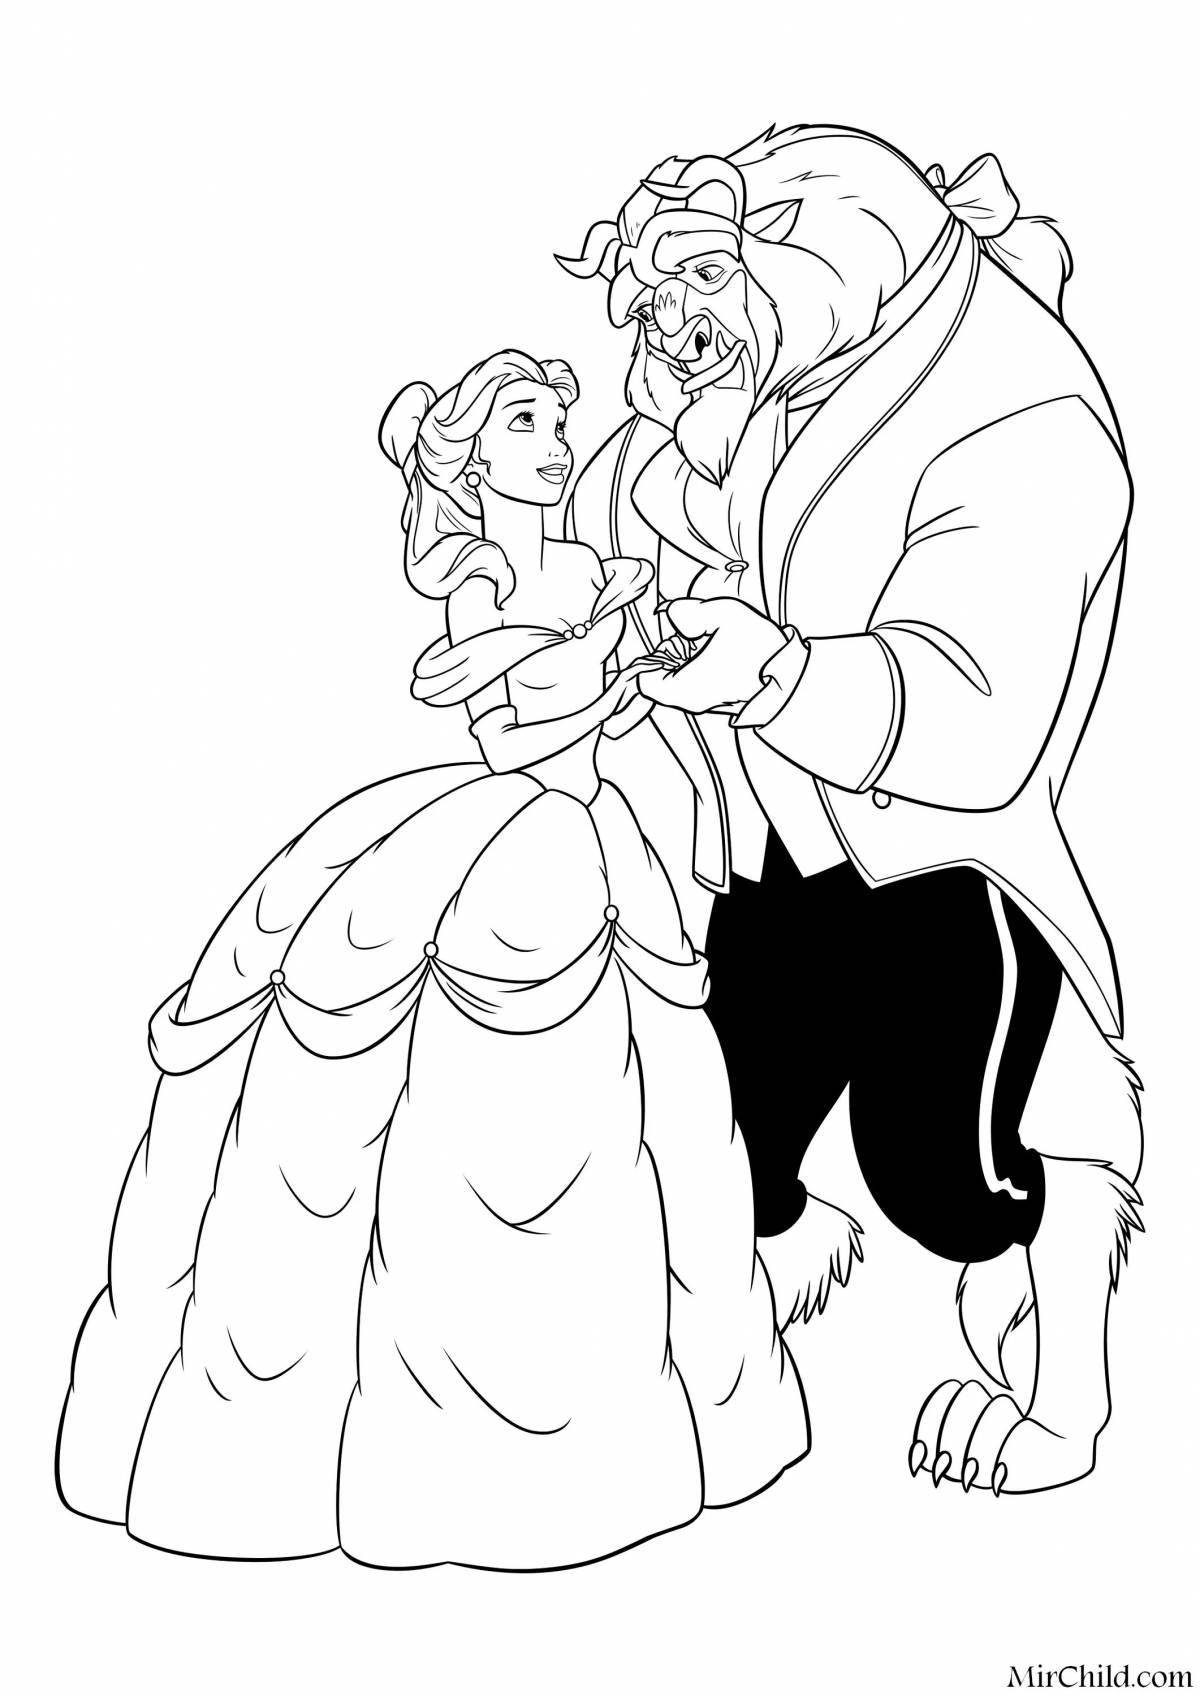 Belle Charming and Monster Coloring Page